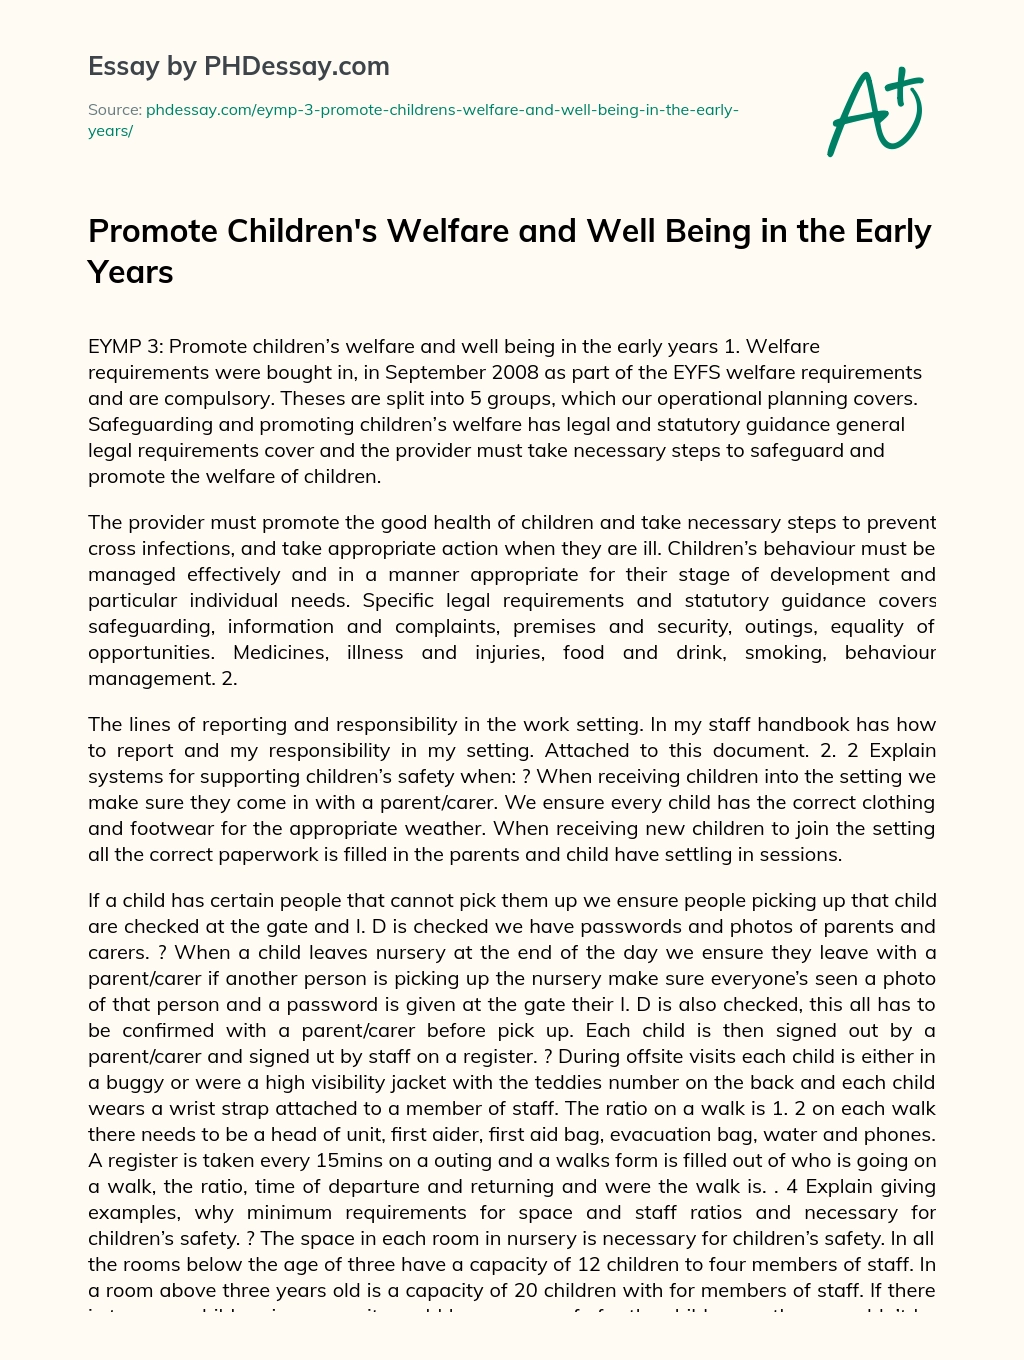 Promote Children’s Welfare and Well Being in the Early Years essay